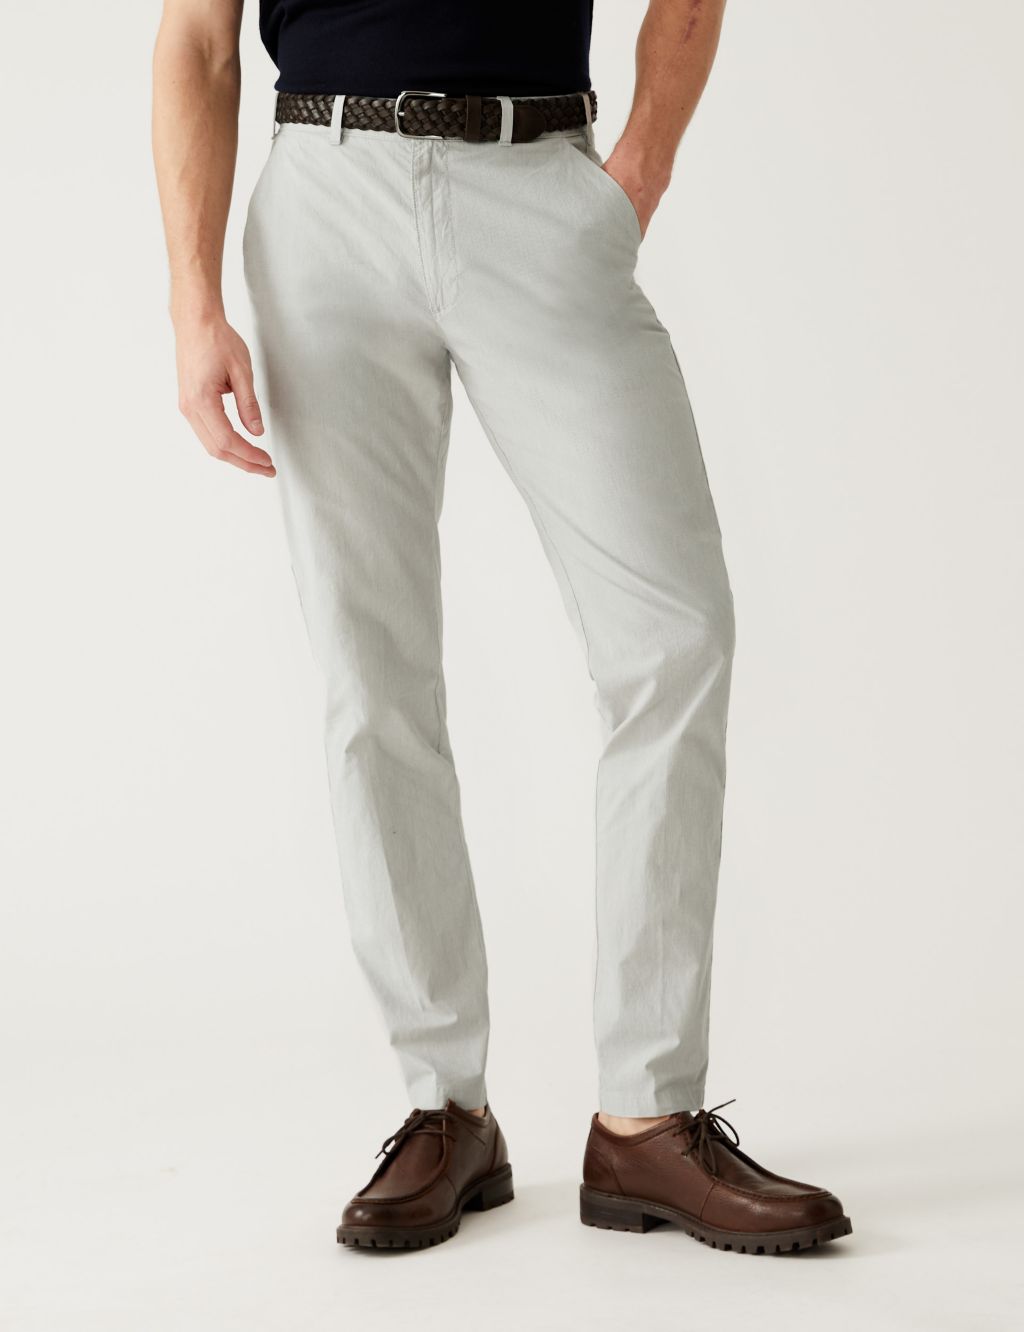 Slim Fit Textured Belted Chinos image 1